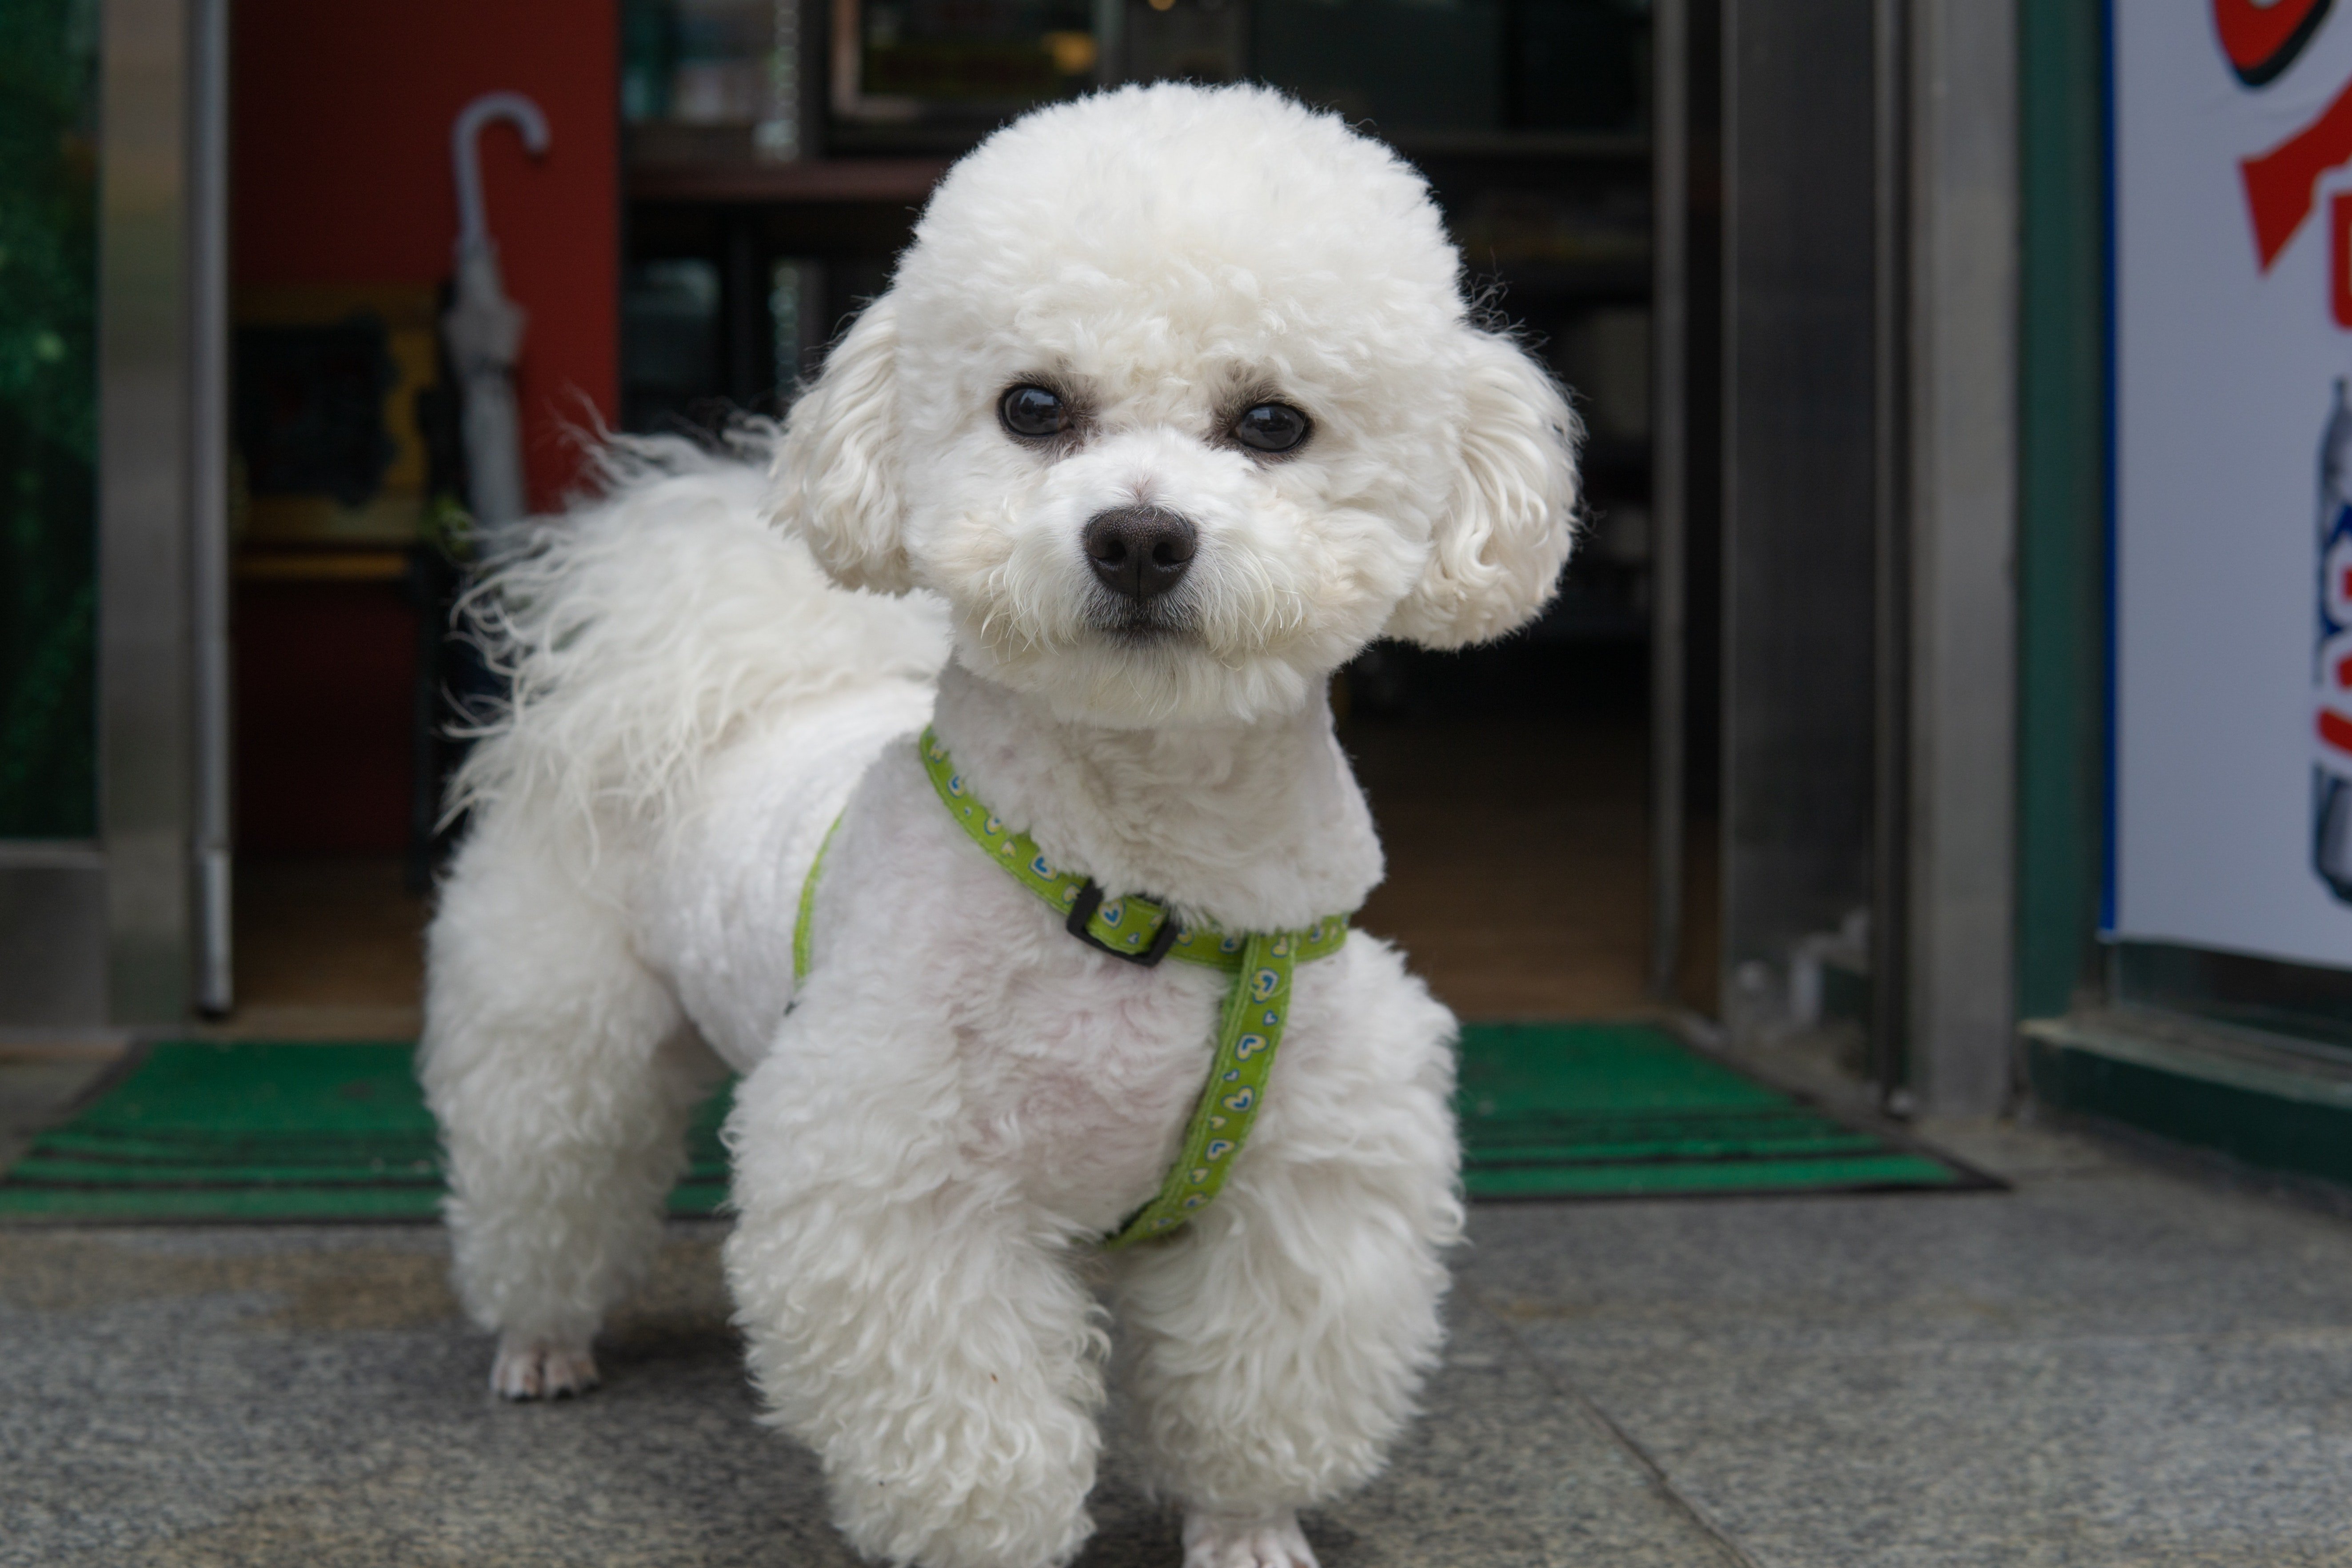 Elizabeth and Martha bumped into an adorable poodle while walking in Manhattan. | Photo: Pexels